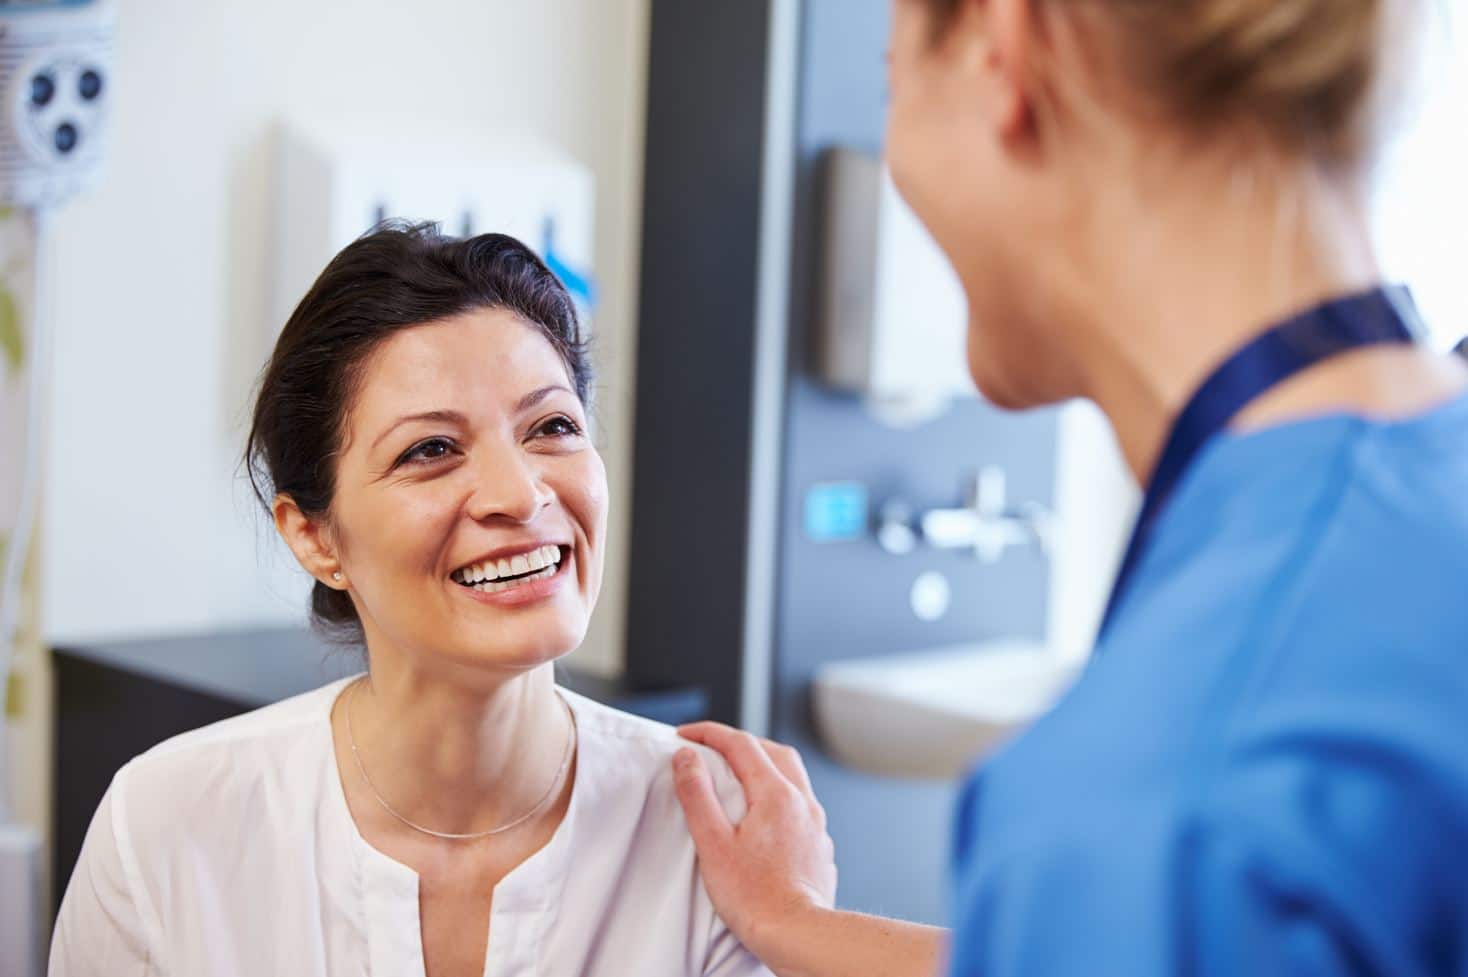 Image of a doctor holding up a mirror to the patient, the patient smiling and touching her nose